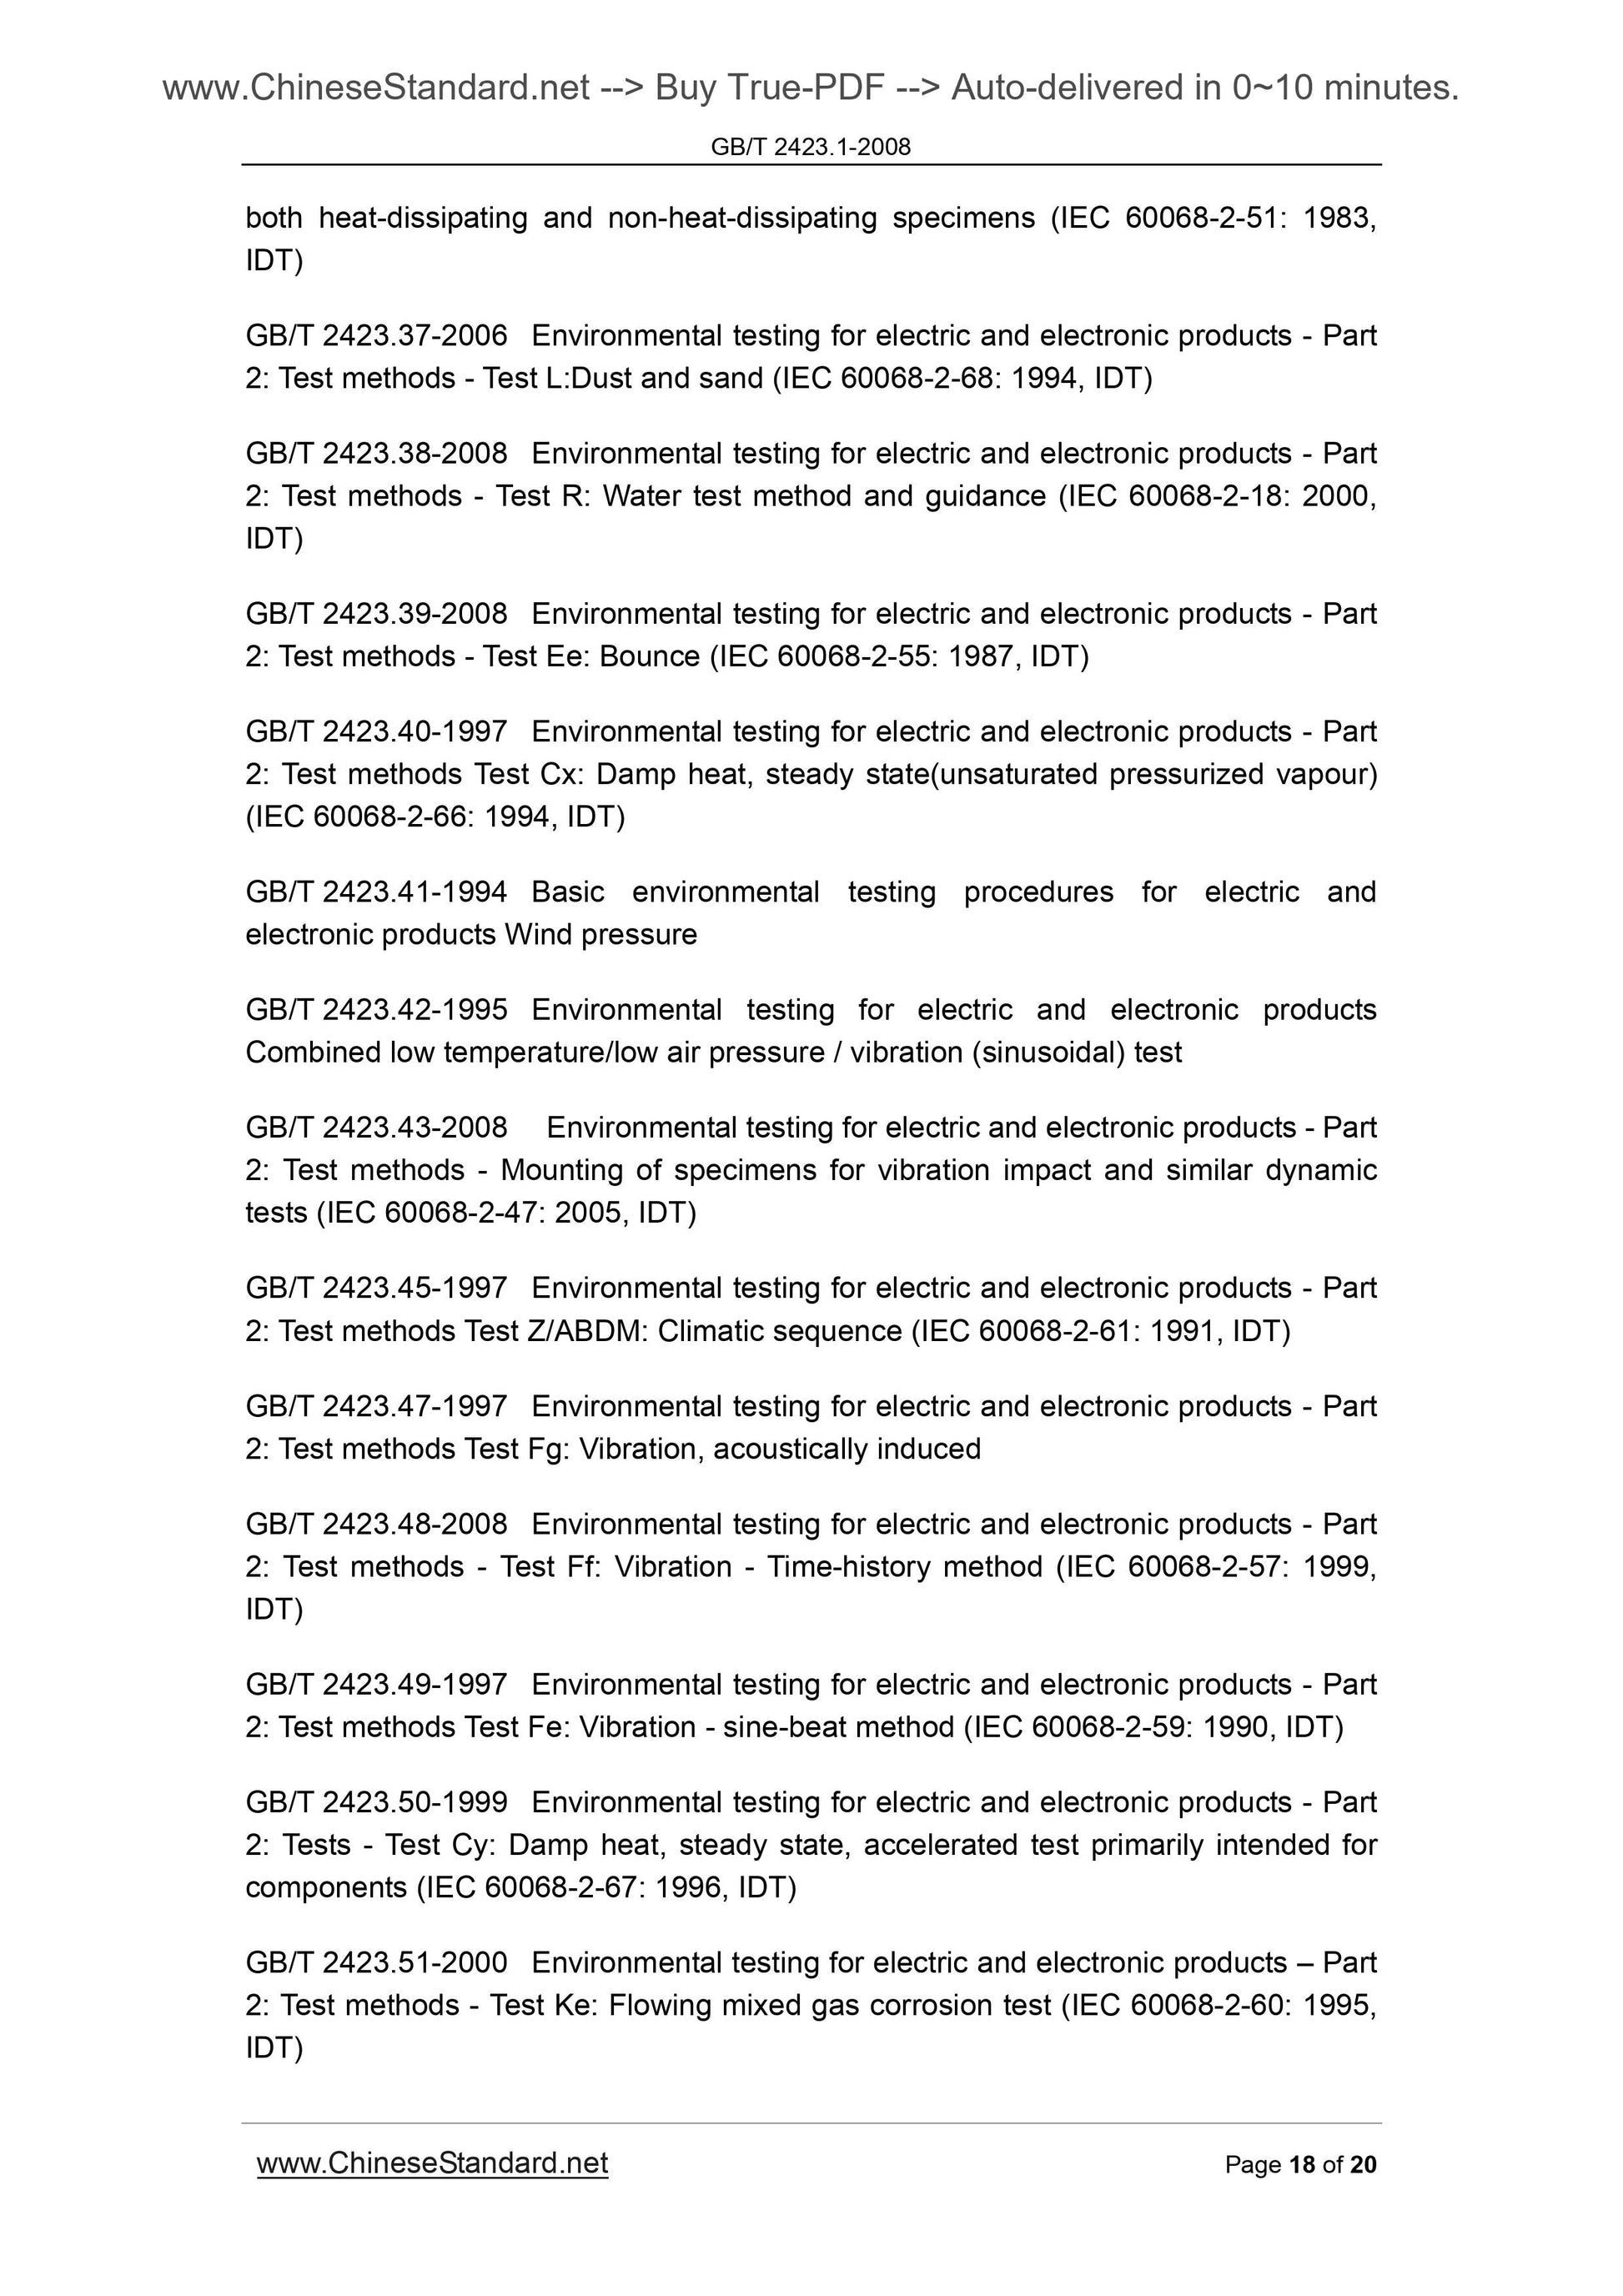 GB/T 2423.1-2008 Page 8